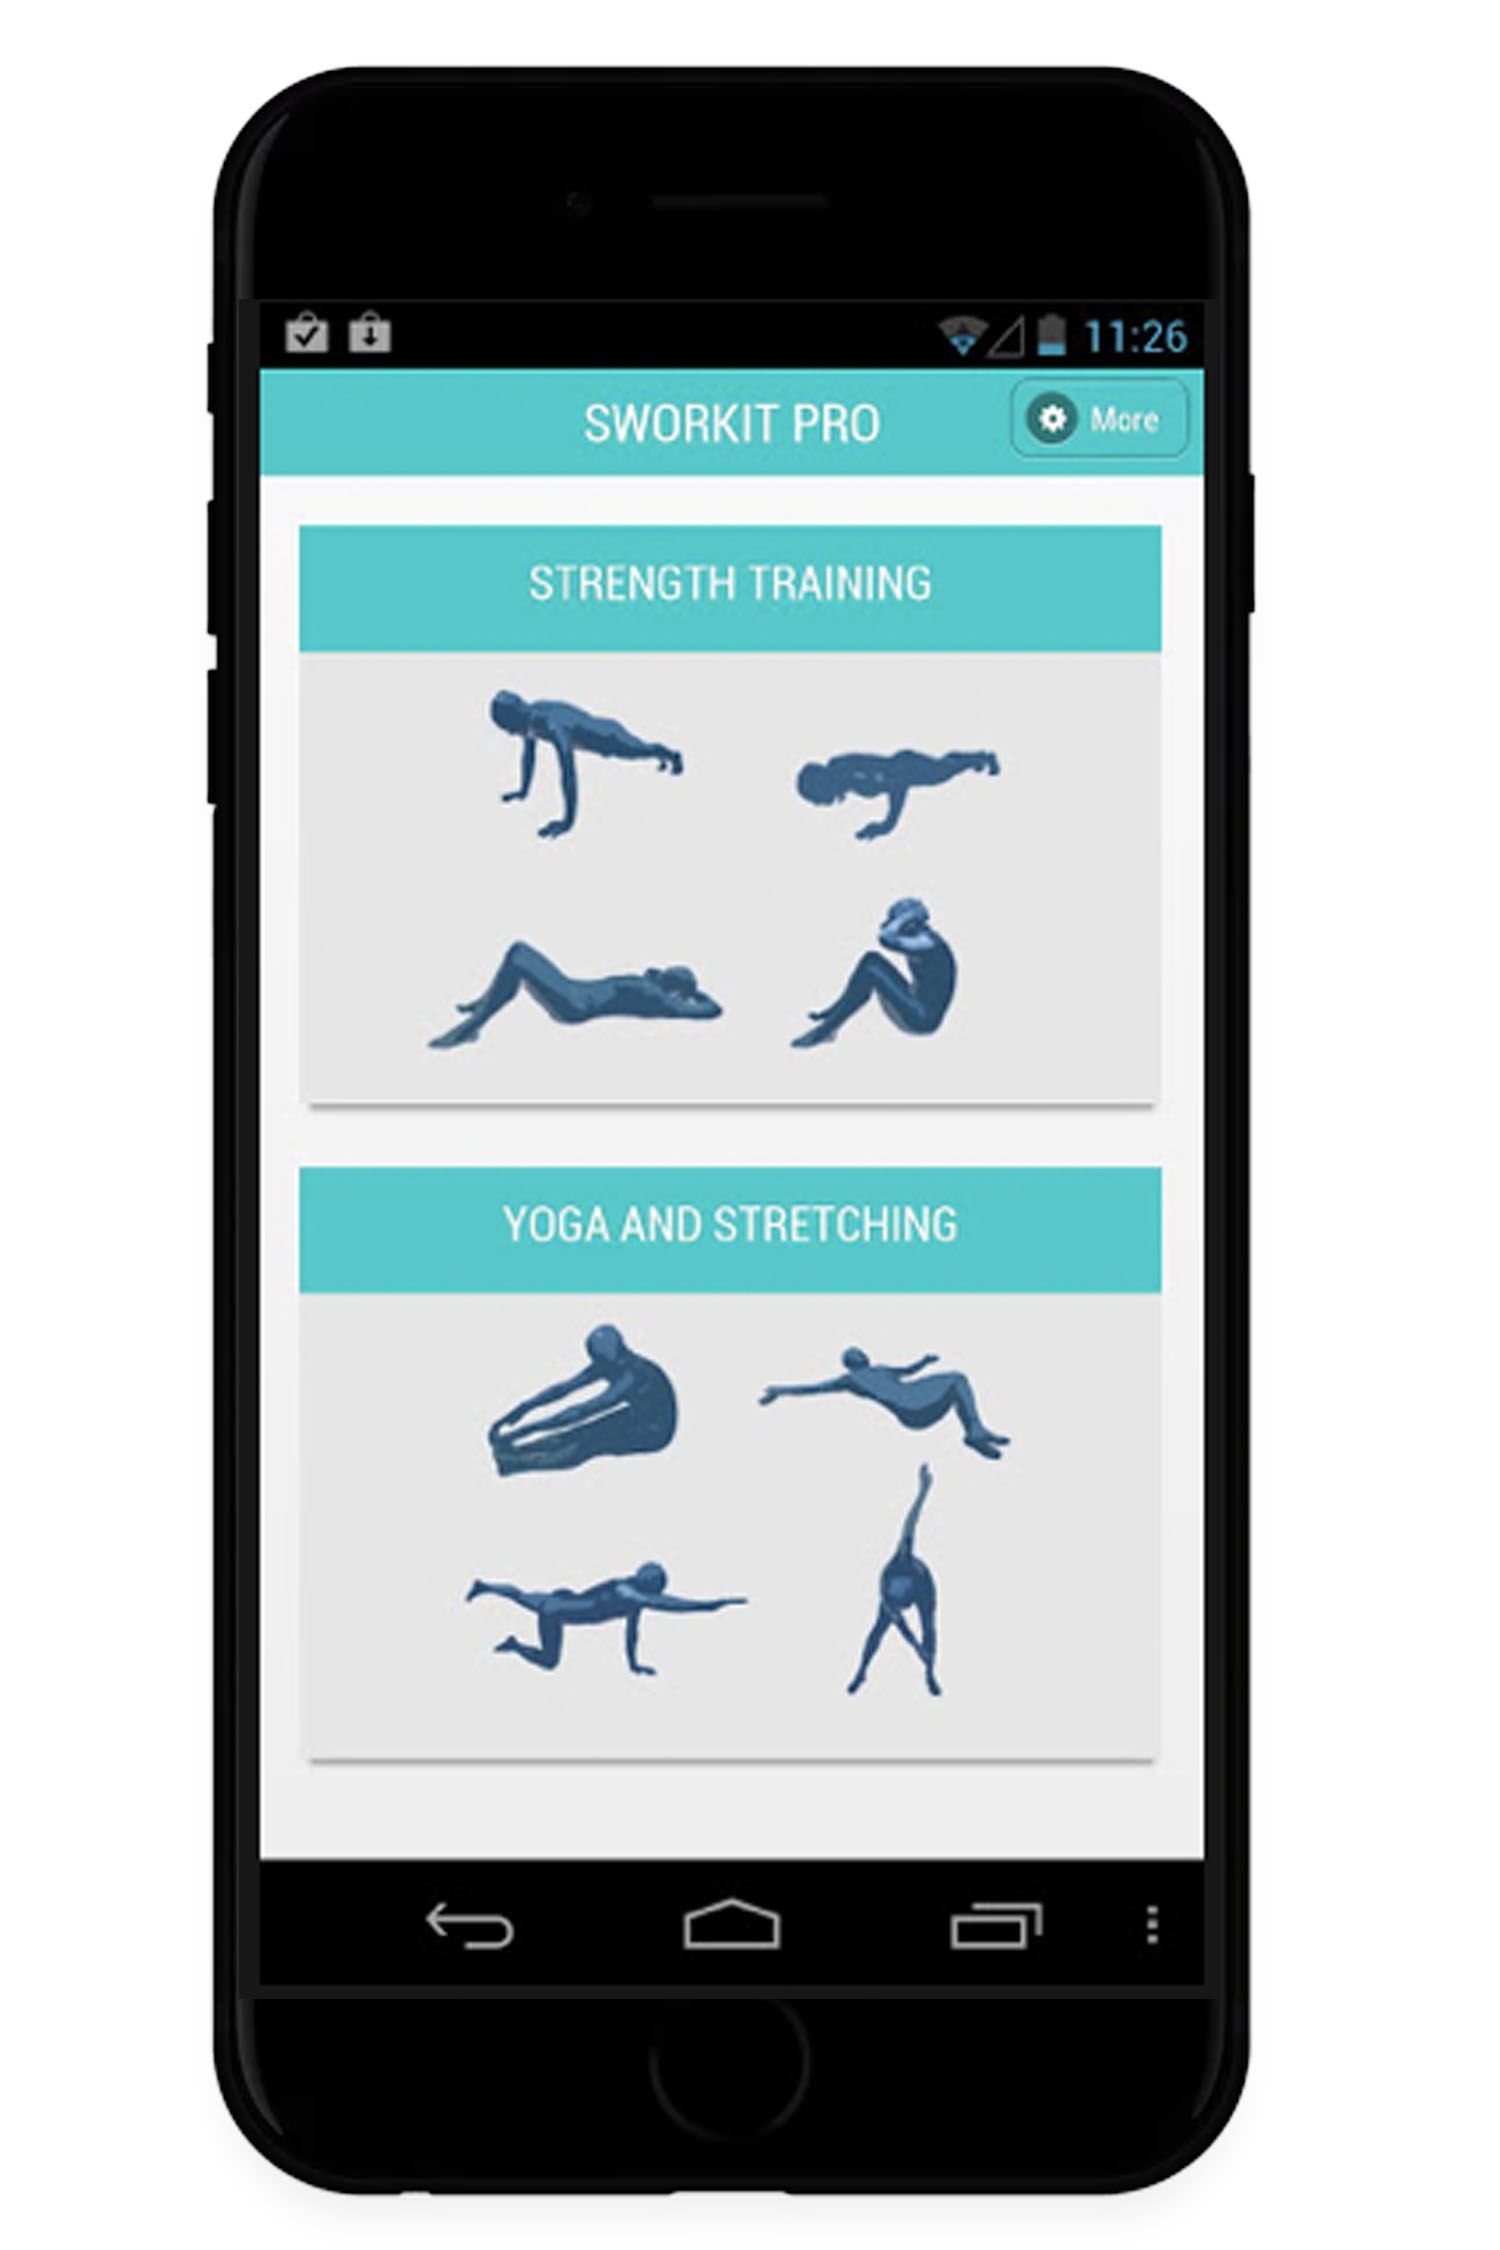 Three powerful fitness apps for workout at home